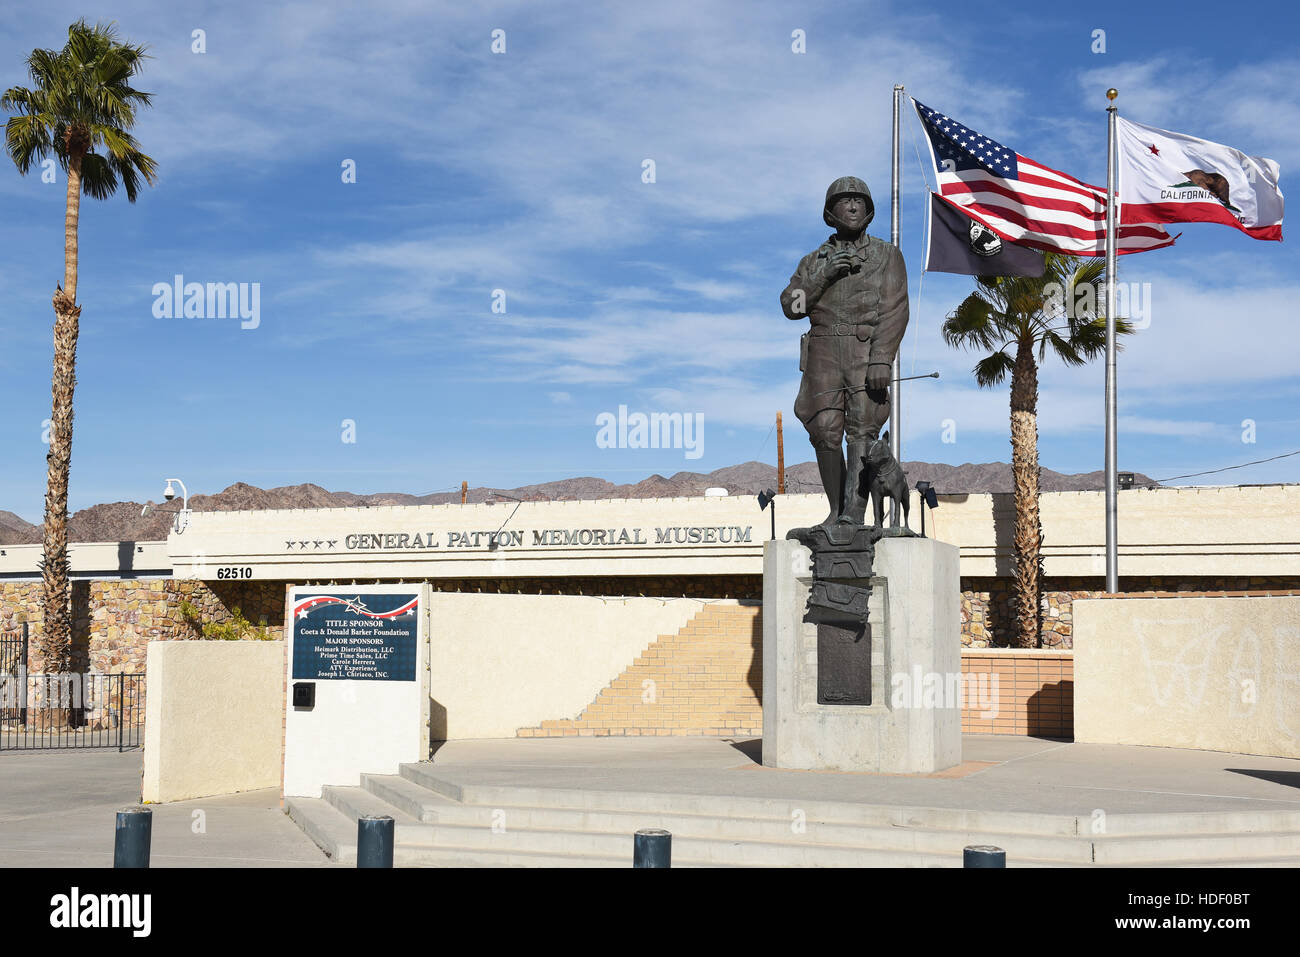 CHIRIACO SUMMIT, CA - DECEMBER 10, 2016: General Patton Memorial Museum. Statue of the General in front of the Museum in his honor Stock Photo